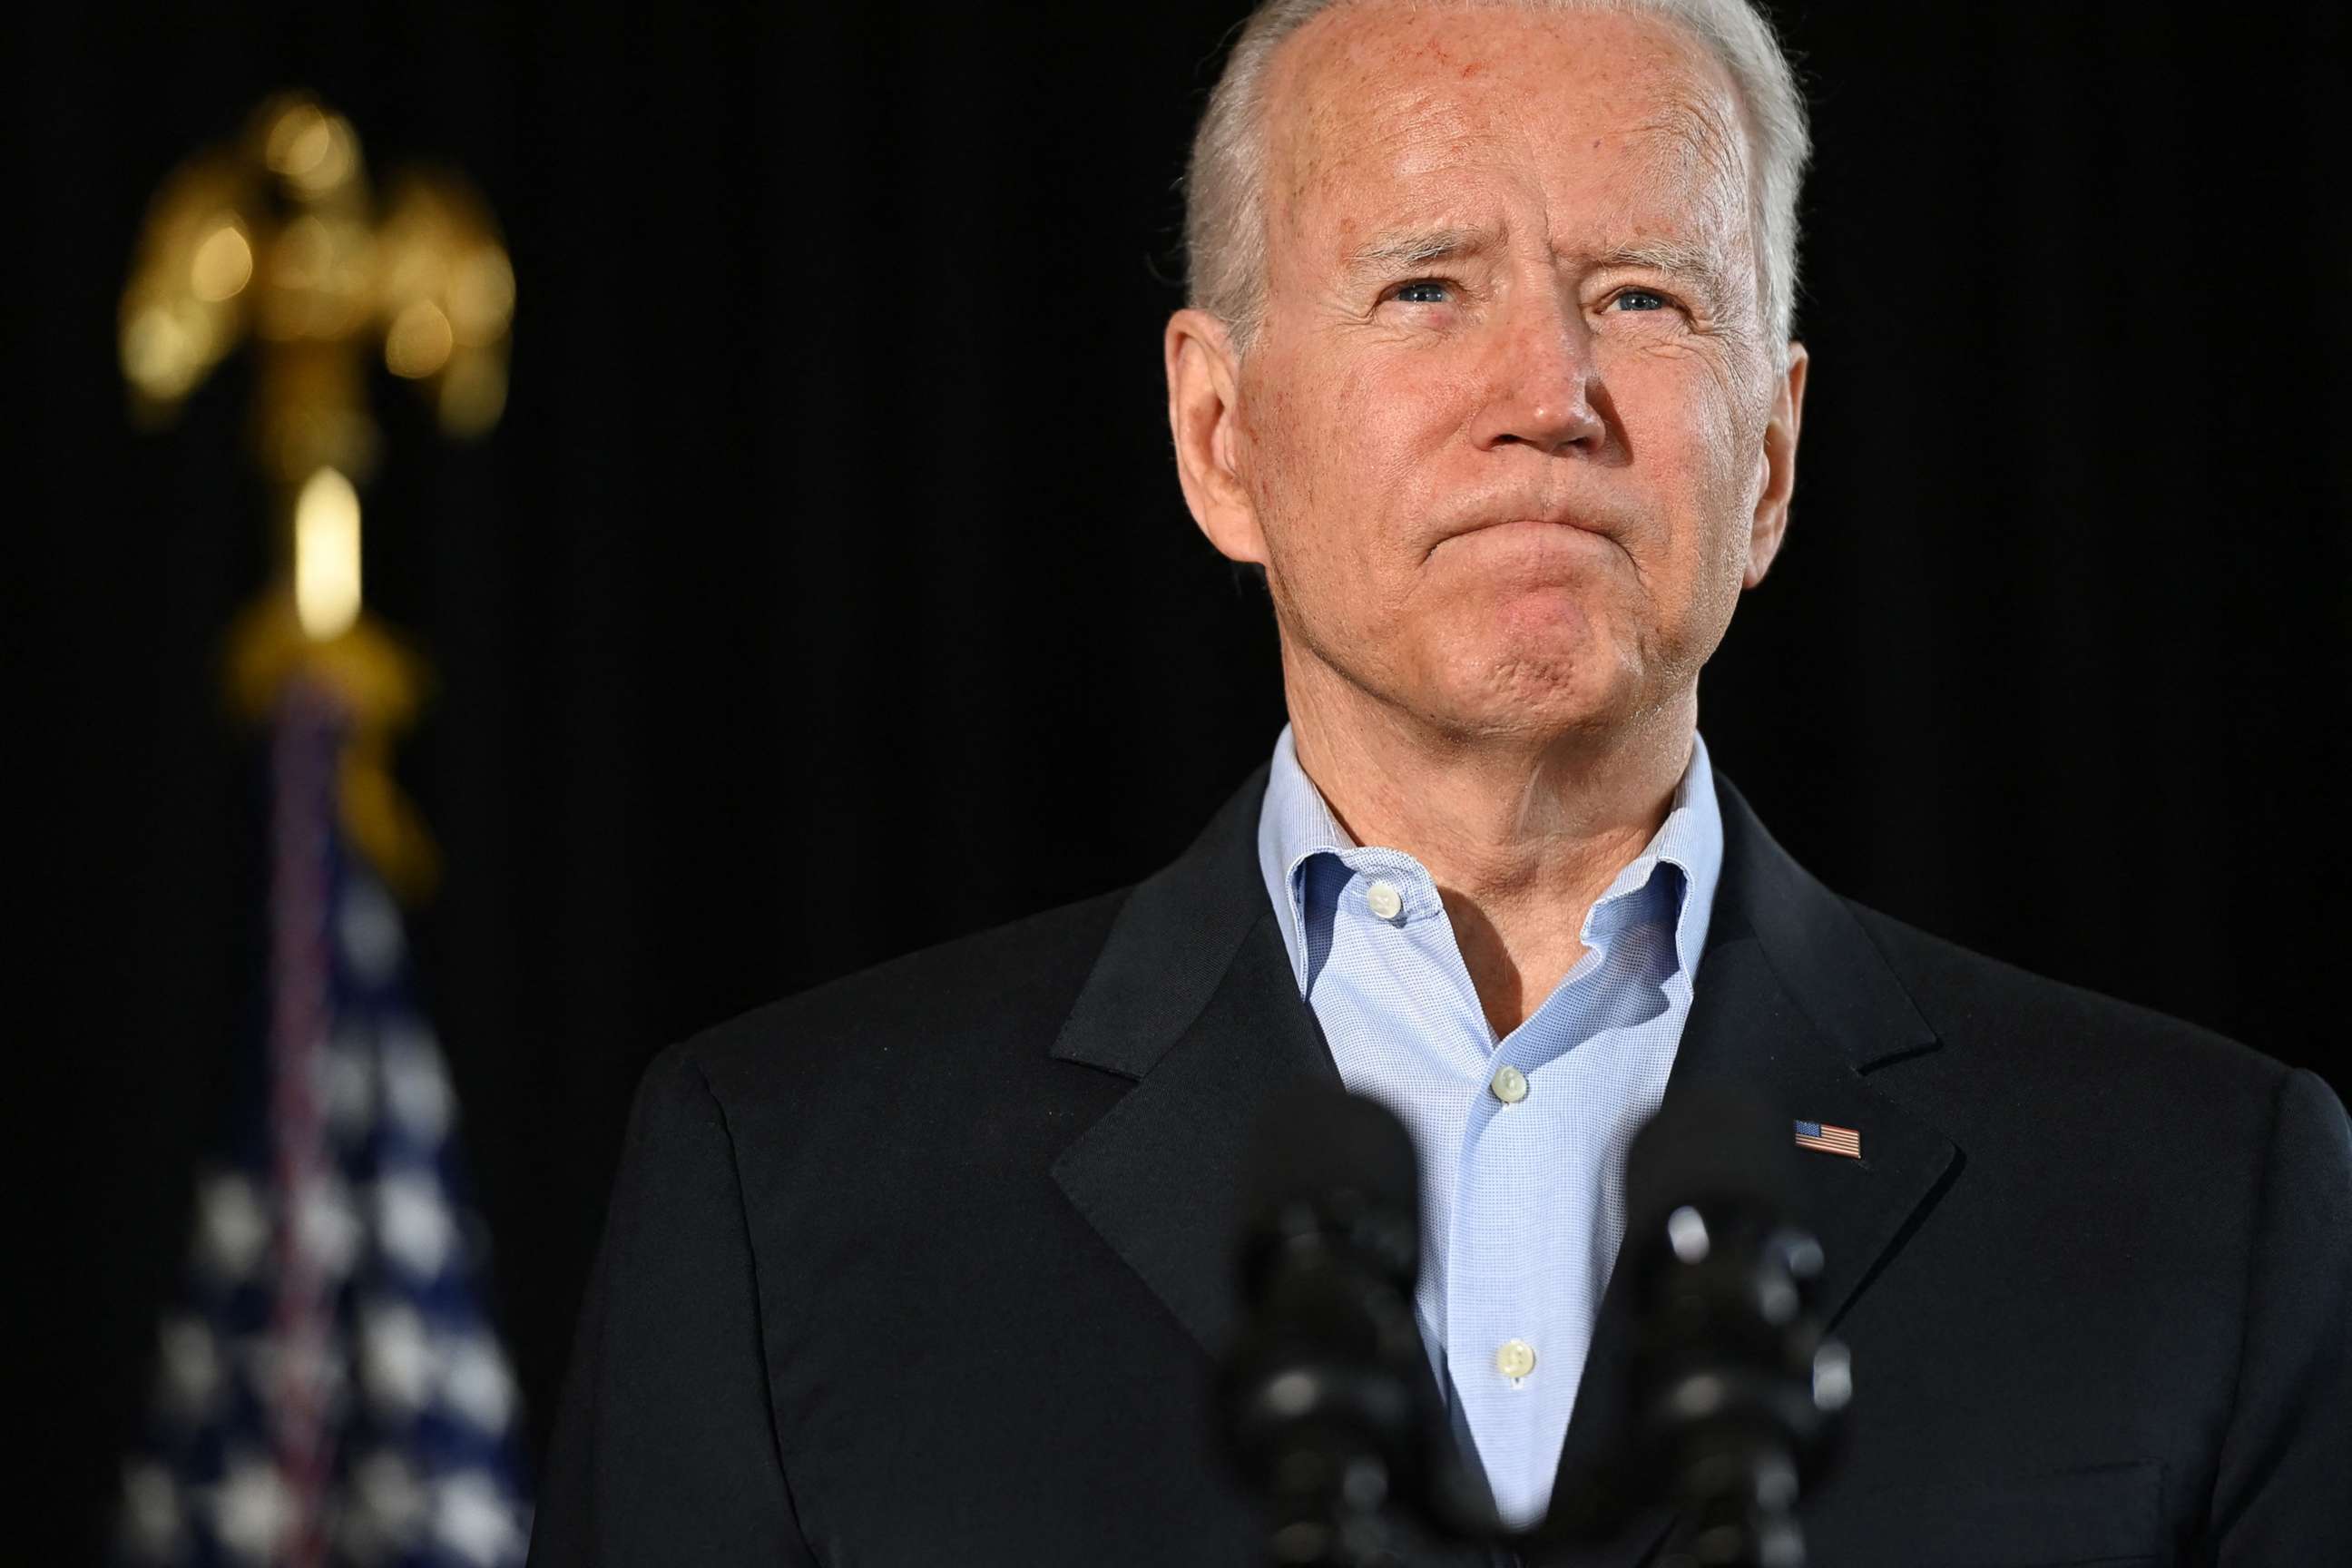 PHOTO: President Joe Biden speaks about the collapse of the 12-story Champlain Towers South condo building last week in Surfside, Florida, following a meeting with families of victims in Miami, Florida, July 1, 2021.